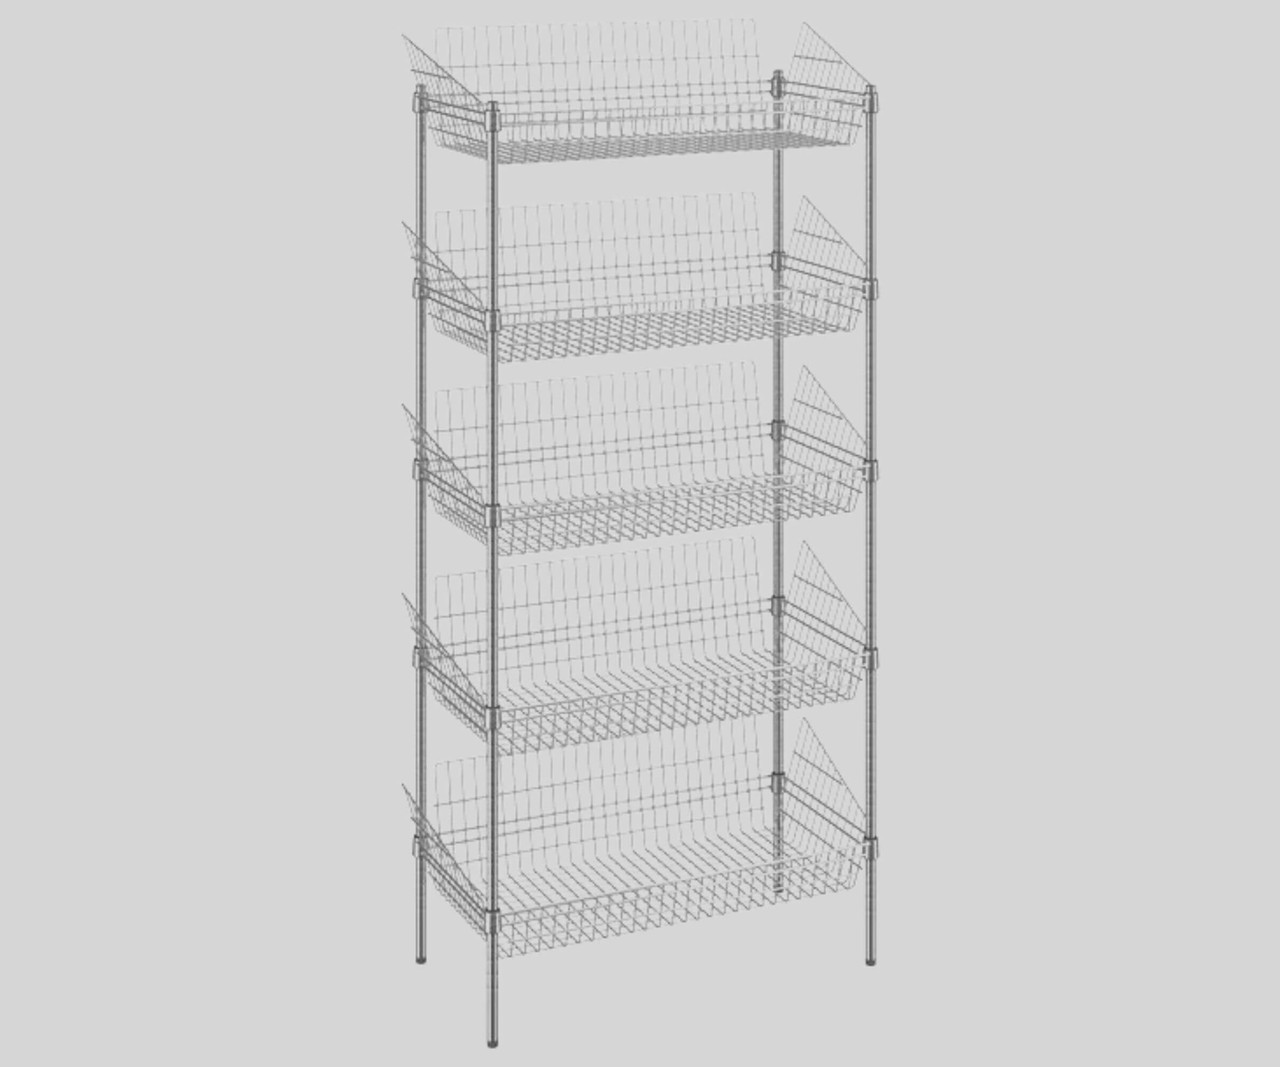 Chicken Pieces CP 18" x 36" x 74" NSF Chrome Stationary 5 Basket Retail Storage Display Stand | Organize and Showcase with Ease